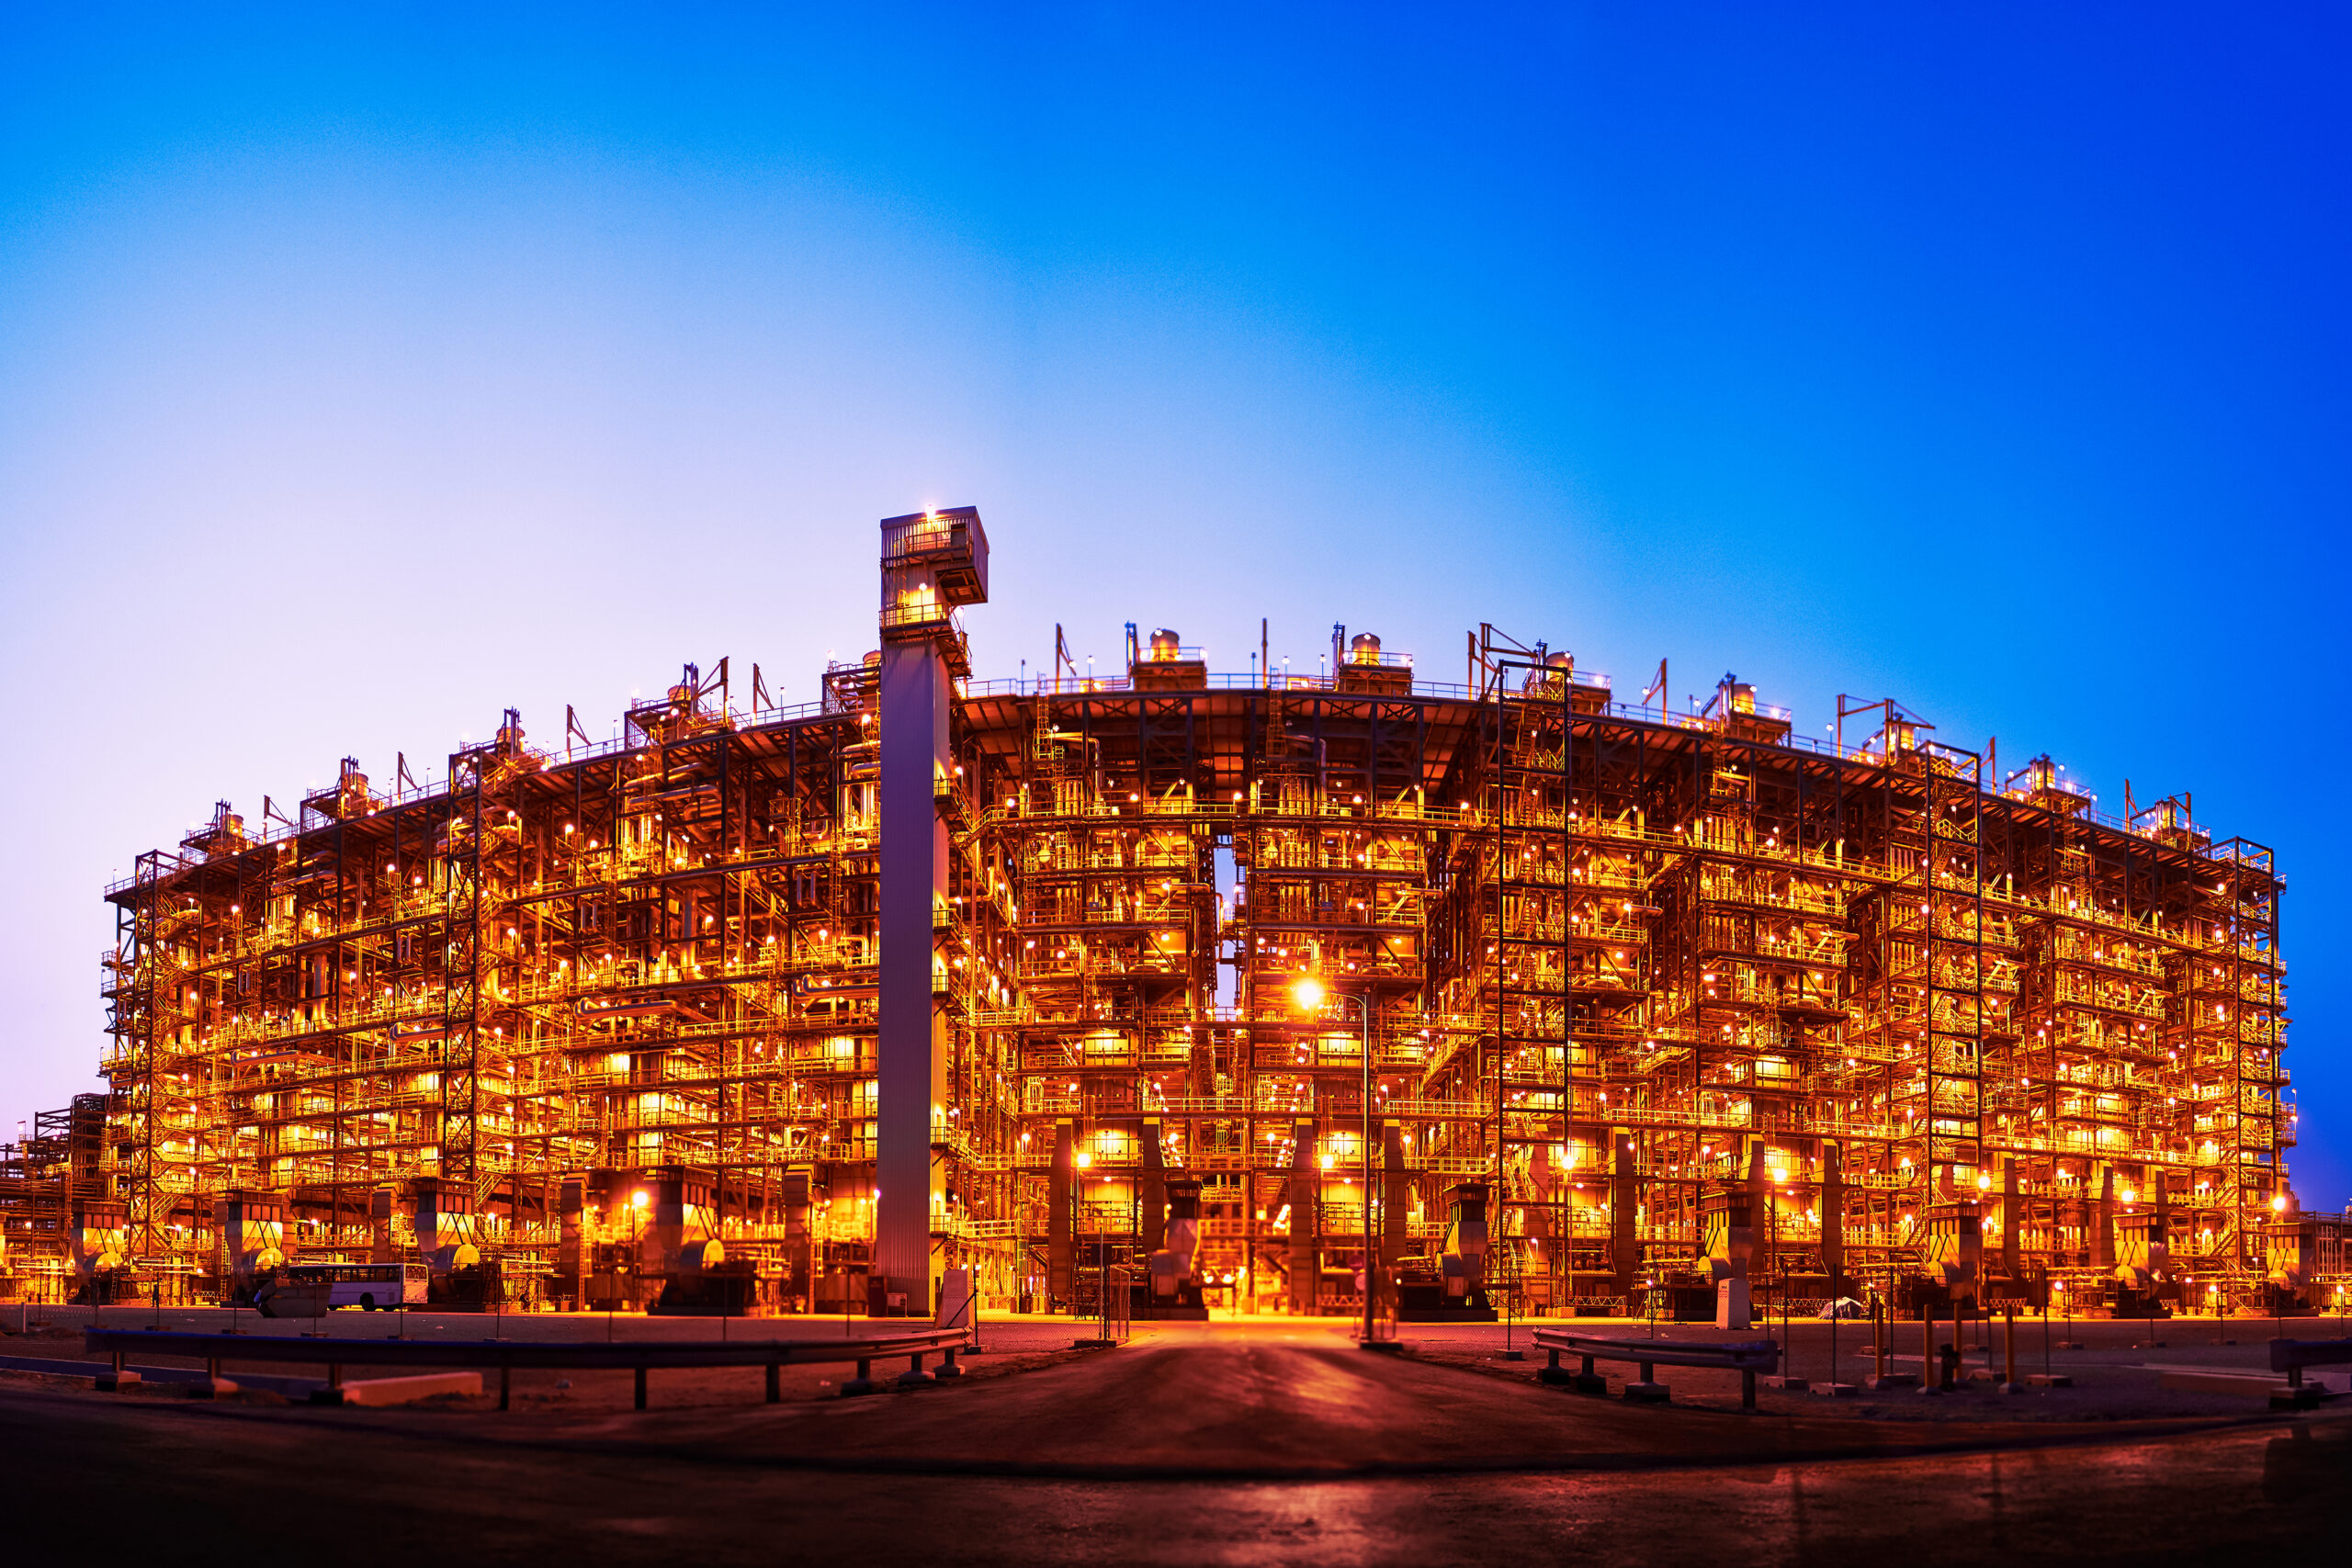 Saudi Aramco’s $10 Billion Refinery Megaproject in China: A Game-Changer in the Downstream Sector